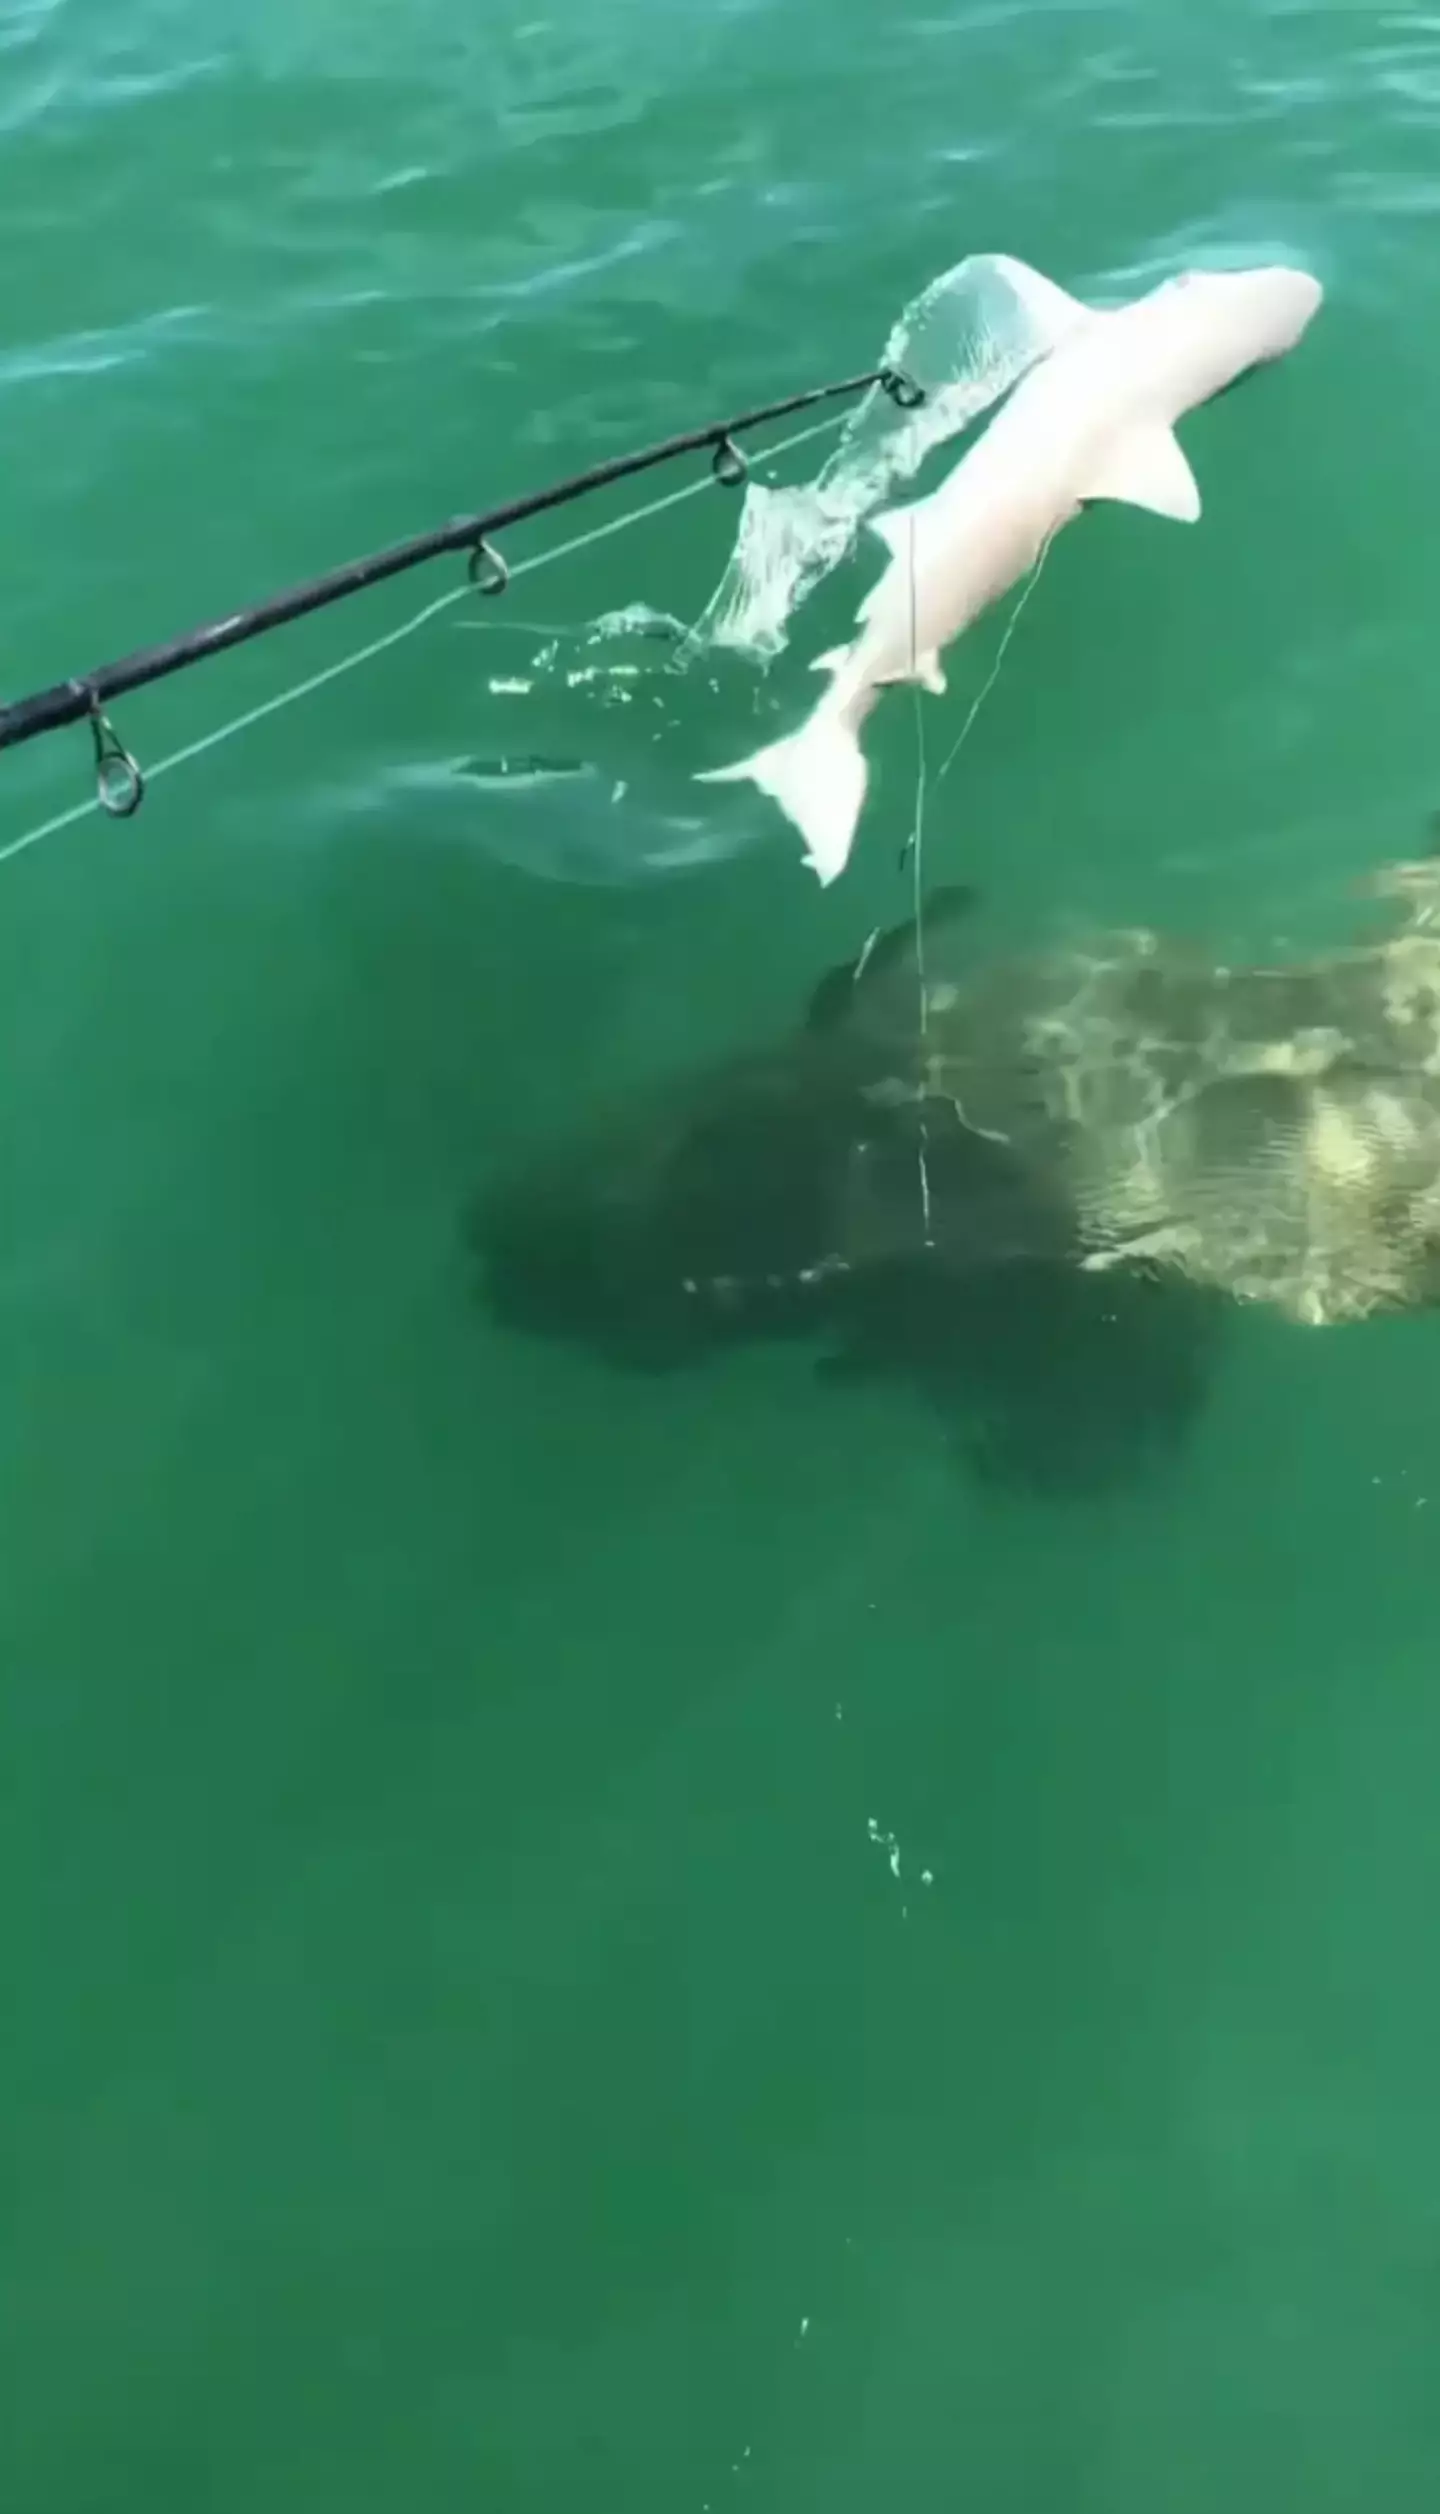 Fishermen off the coast of Florida captured the shocking moment an Atlantic goliath grouper took down a blacknose shark.